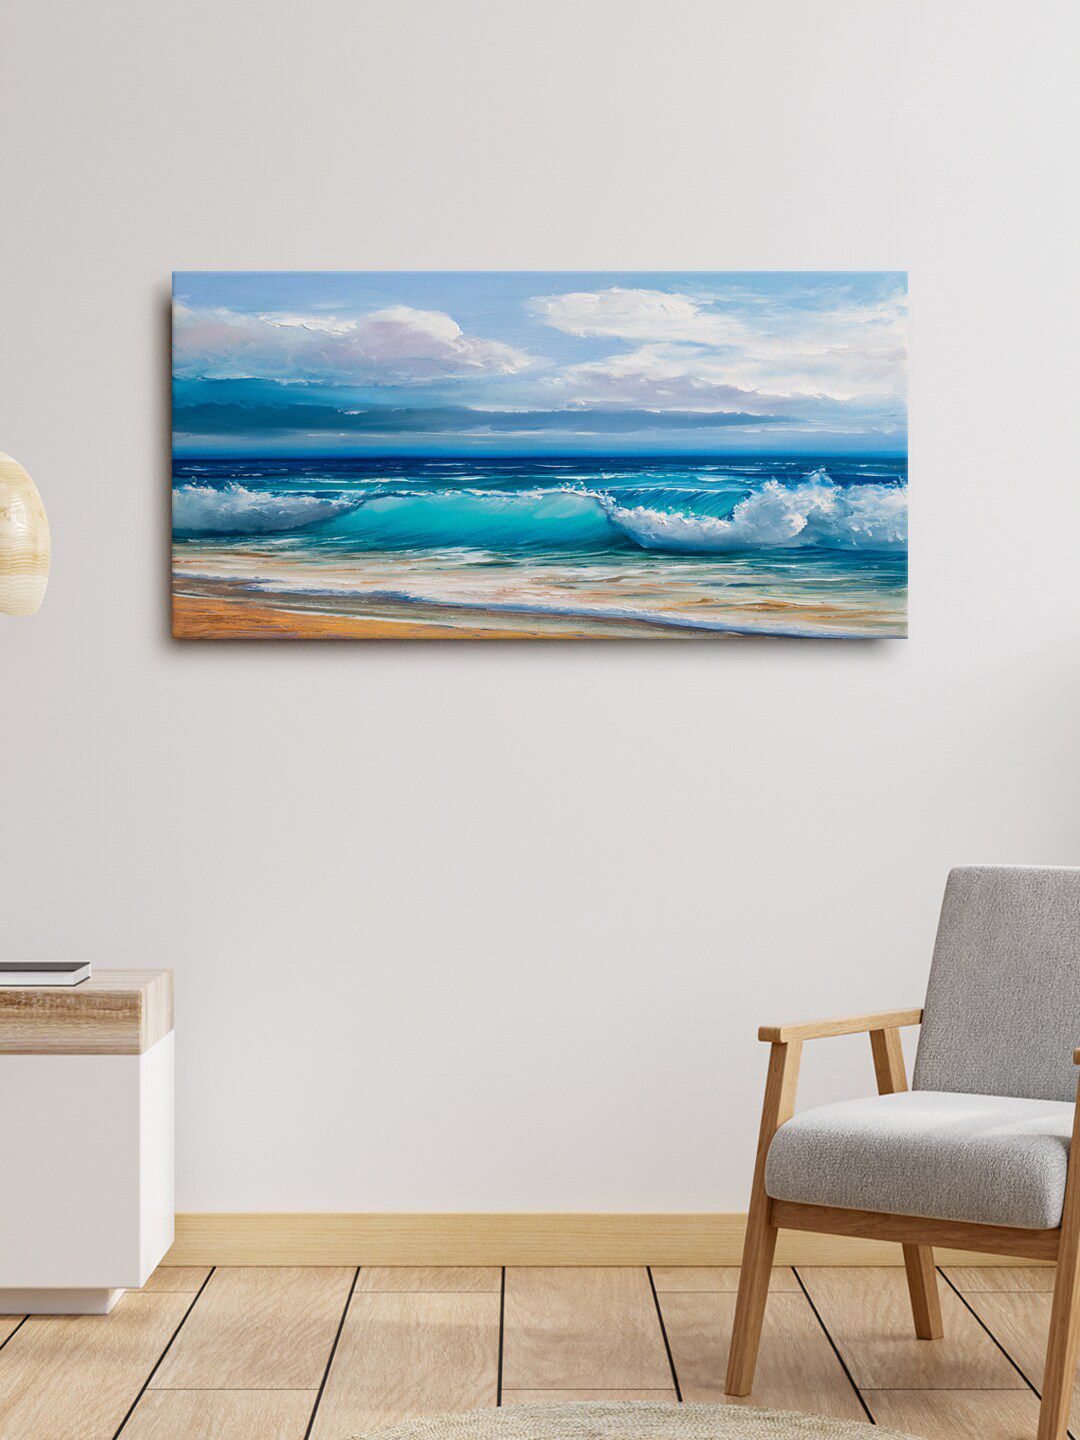 999Store Blue & White Beach Canvas Painting Wall Art Price in India